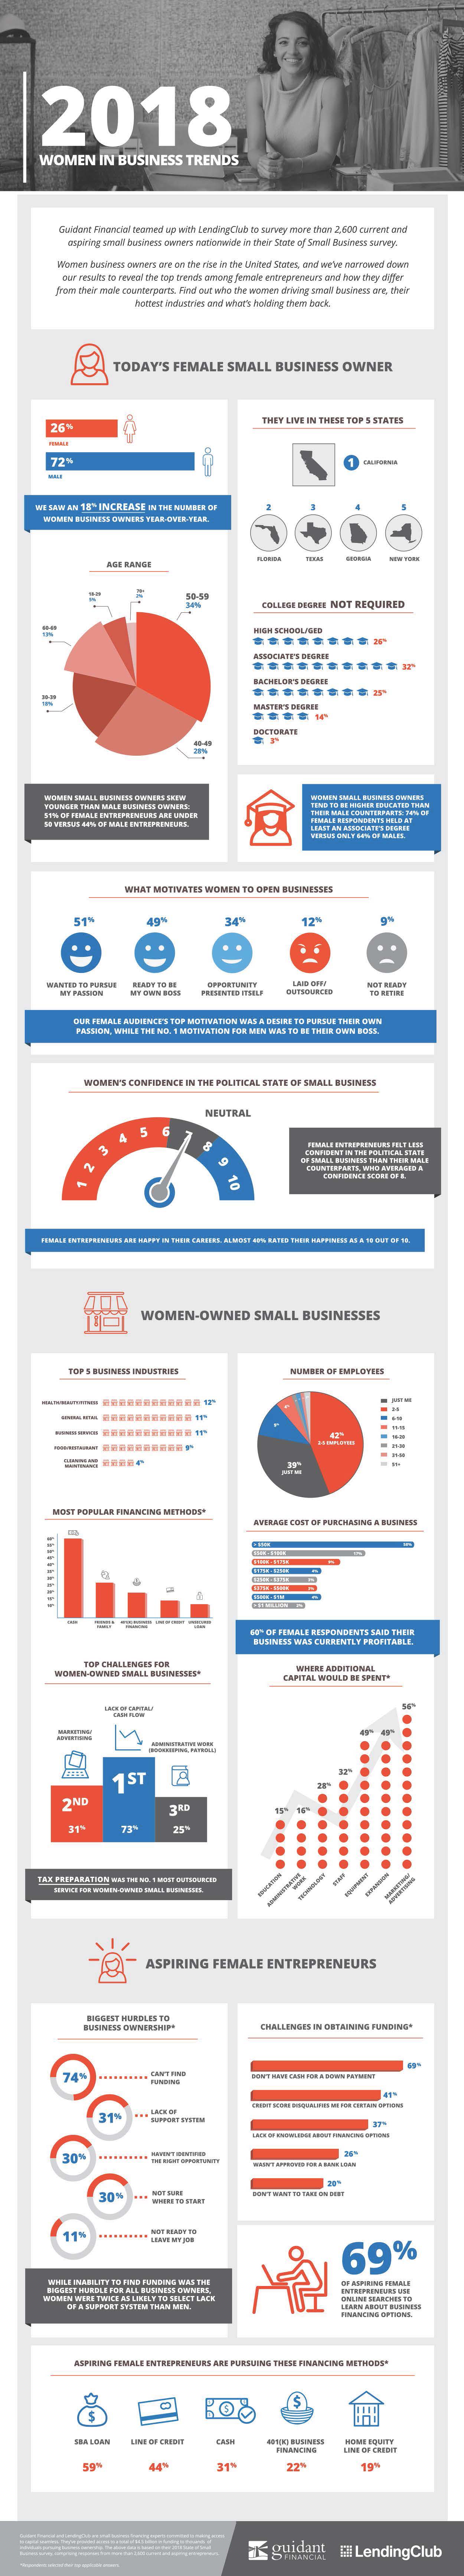 Women in Business Trends: Infographic 2018 